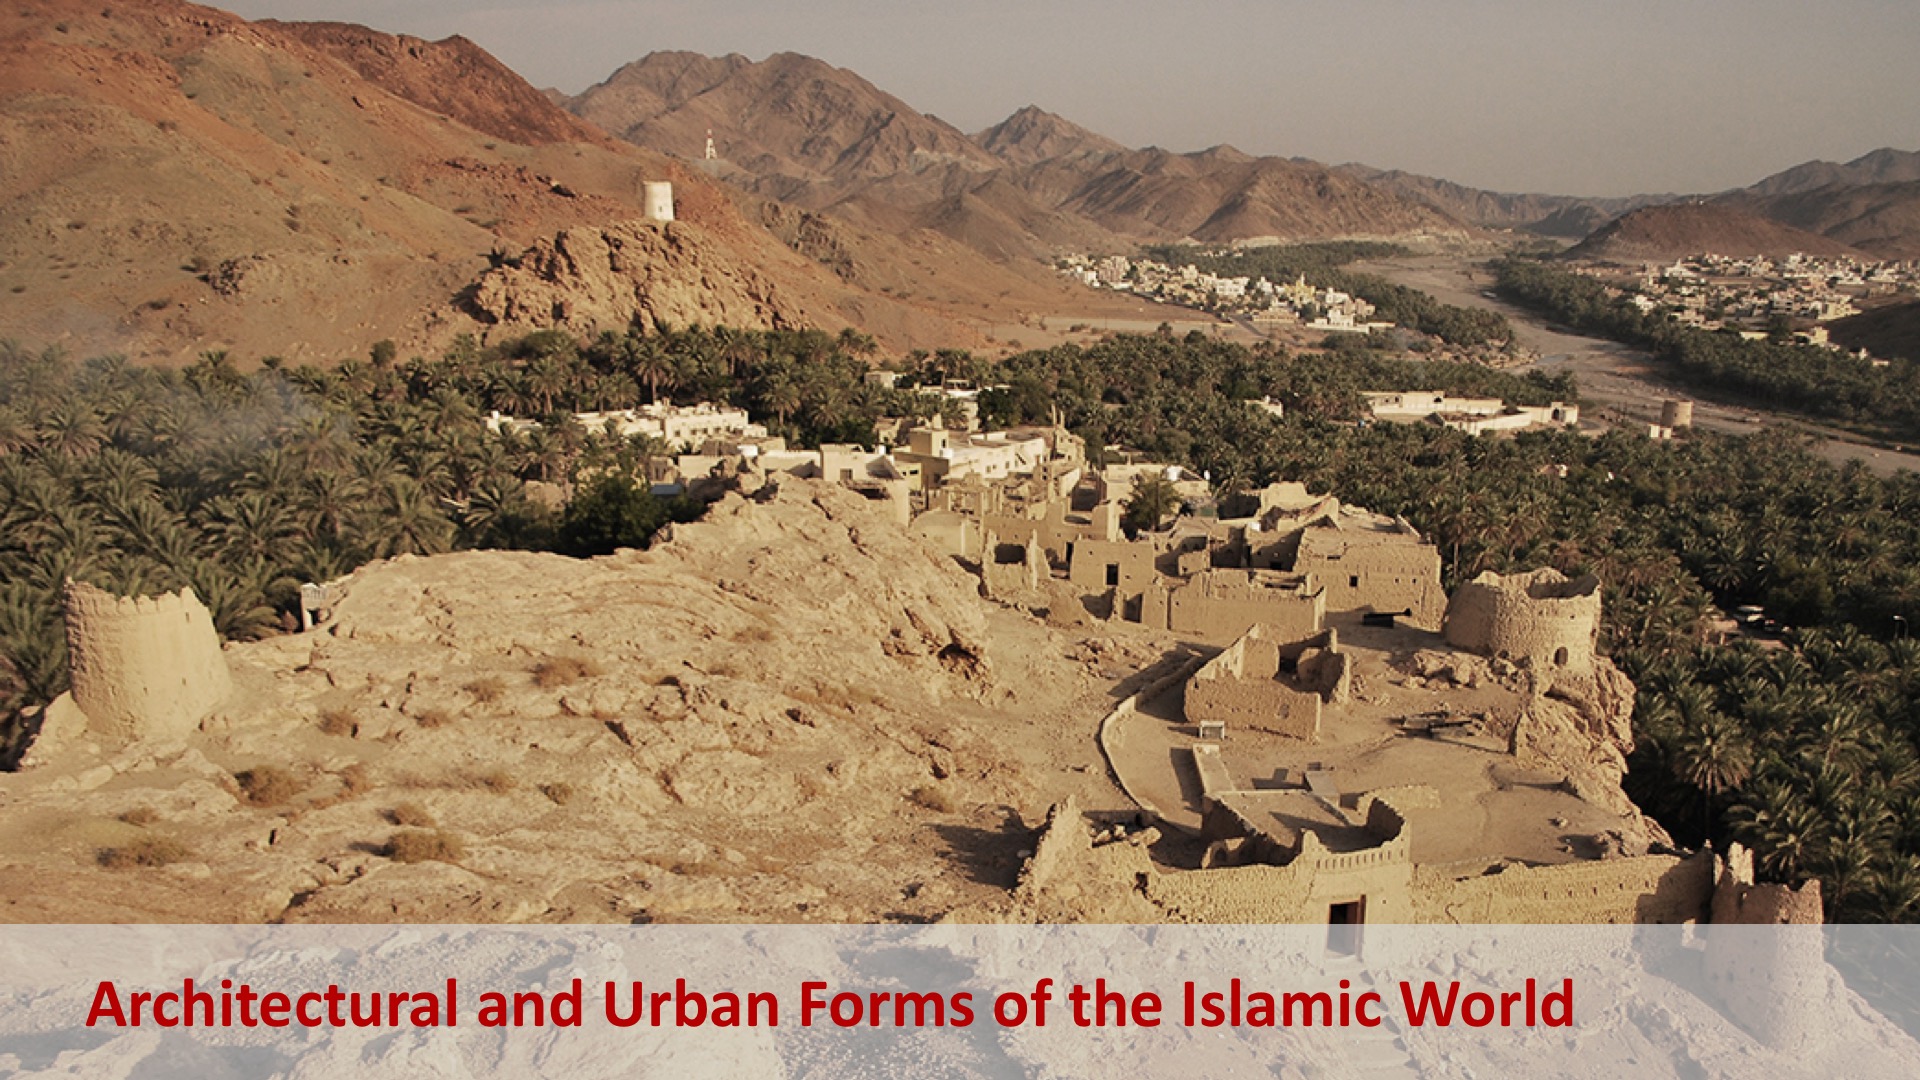 ArCHIAM: Architectural and Urban Forms of the Islamic World